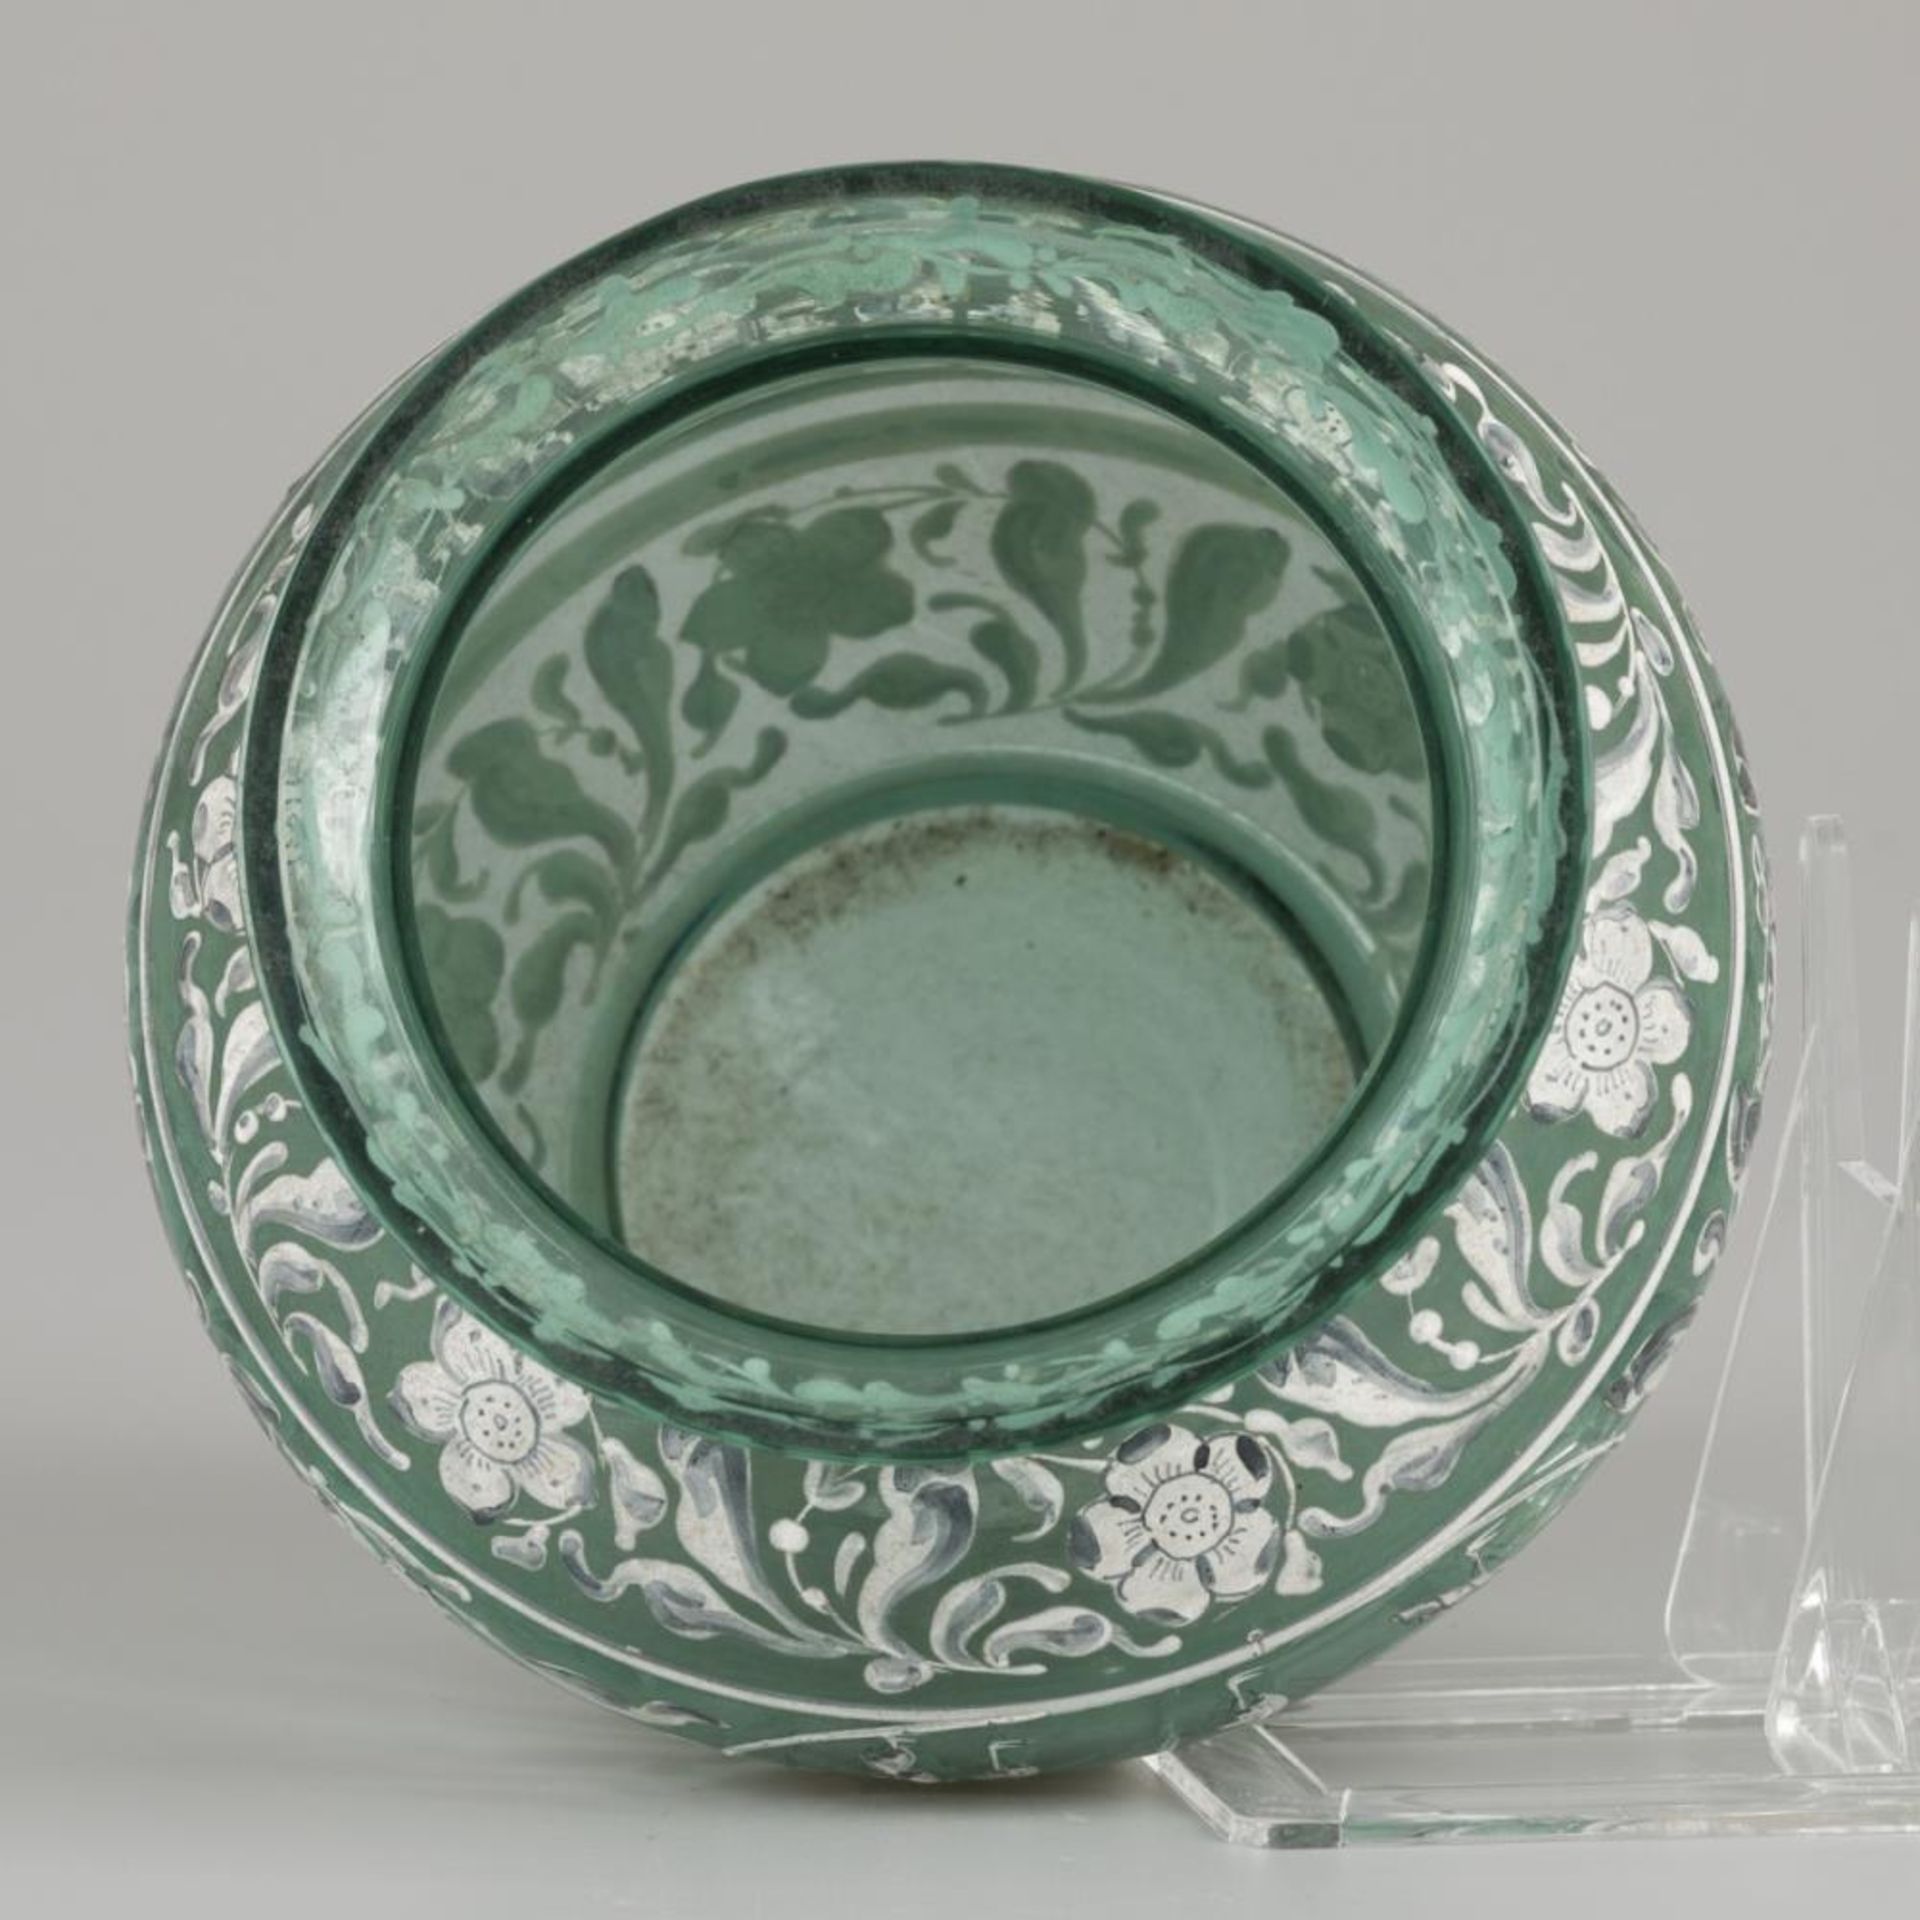 A glass vase with enamelled motif, Italy, 19th century. - Image 6 of 7